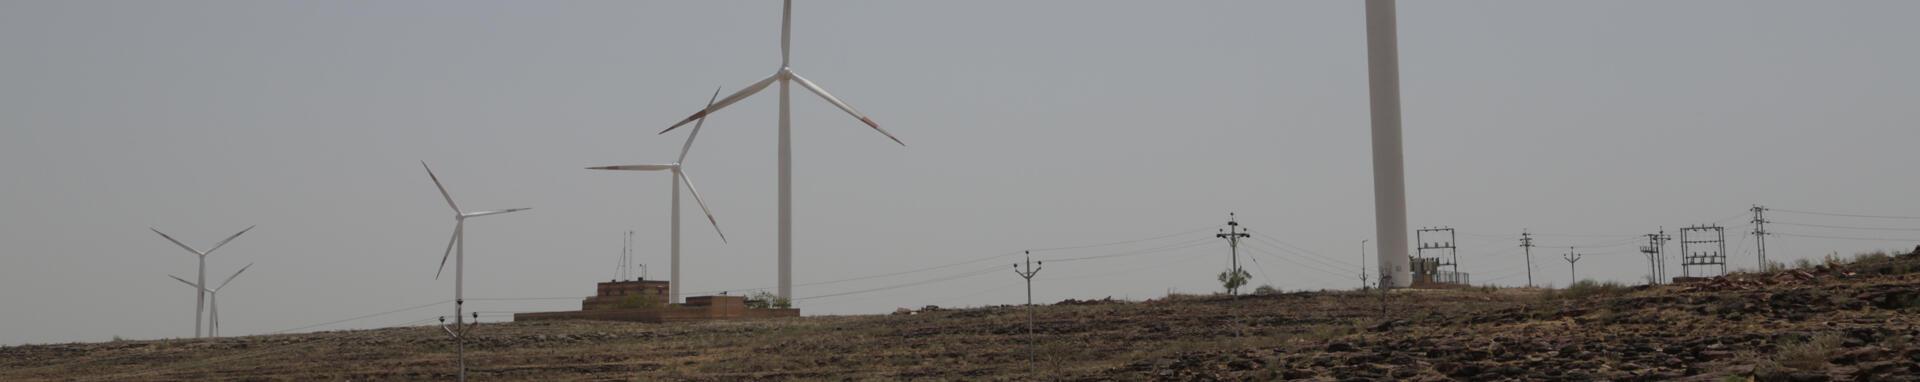 CIF Action Windpower in India. Photo Credit - Jitendra Parihar/Thomson Reuters Foundation